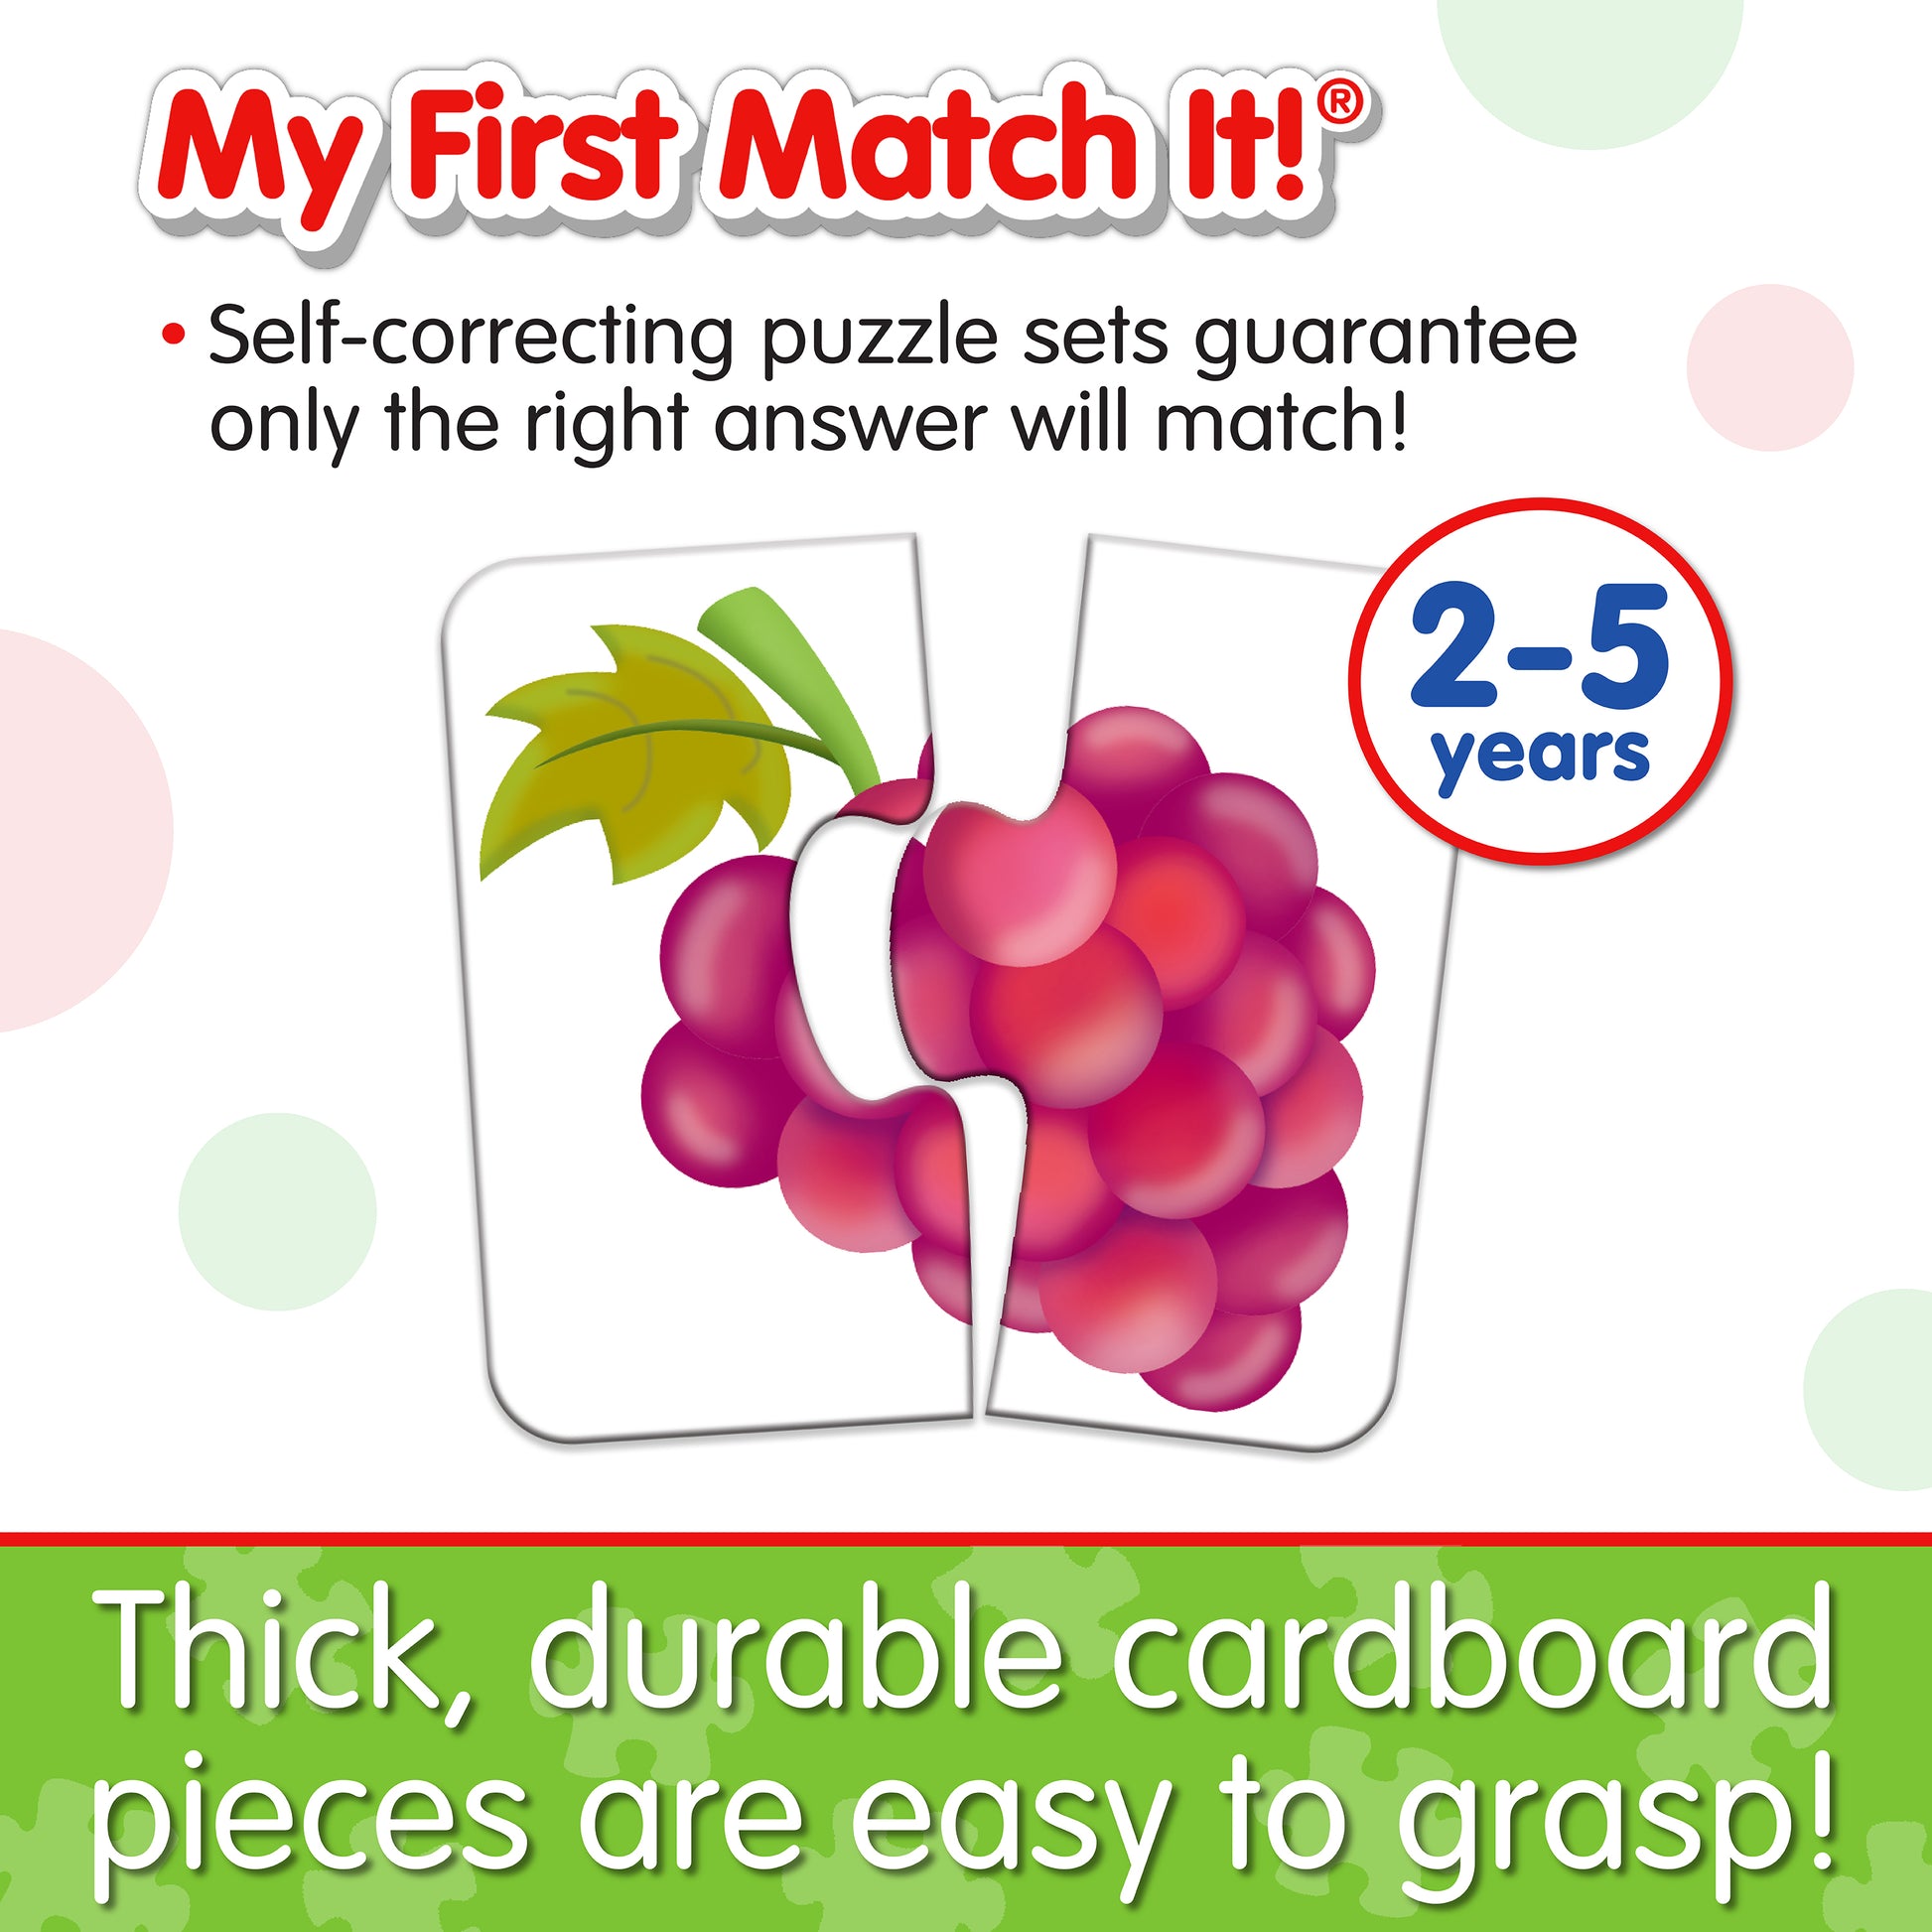 Infographic about My First Match It - Things I Eat's features that says, "Thick, durable cardboard pieces are easy to grasp!"